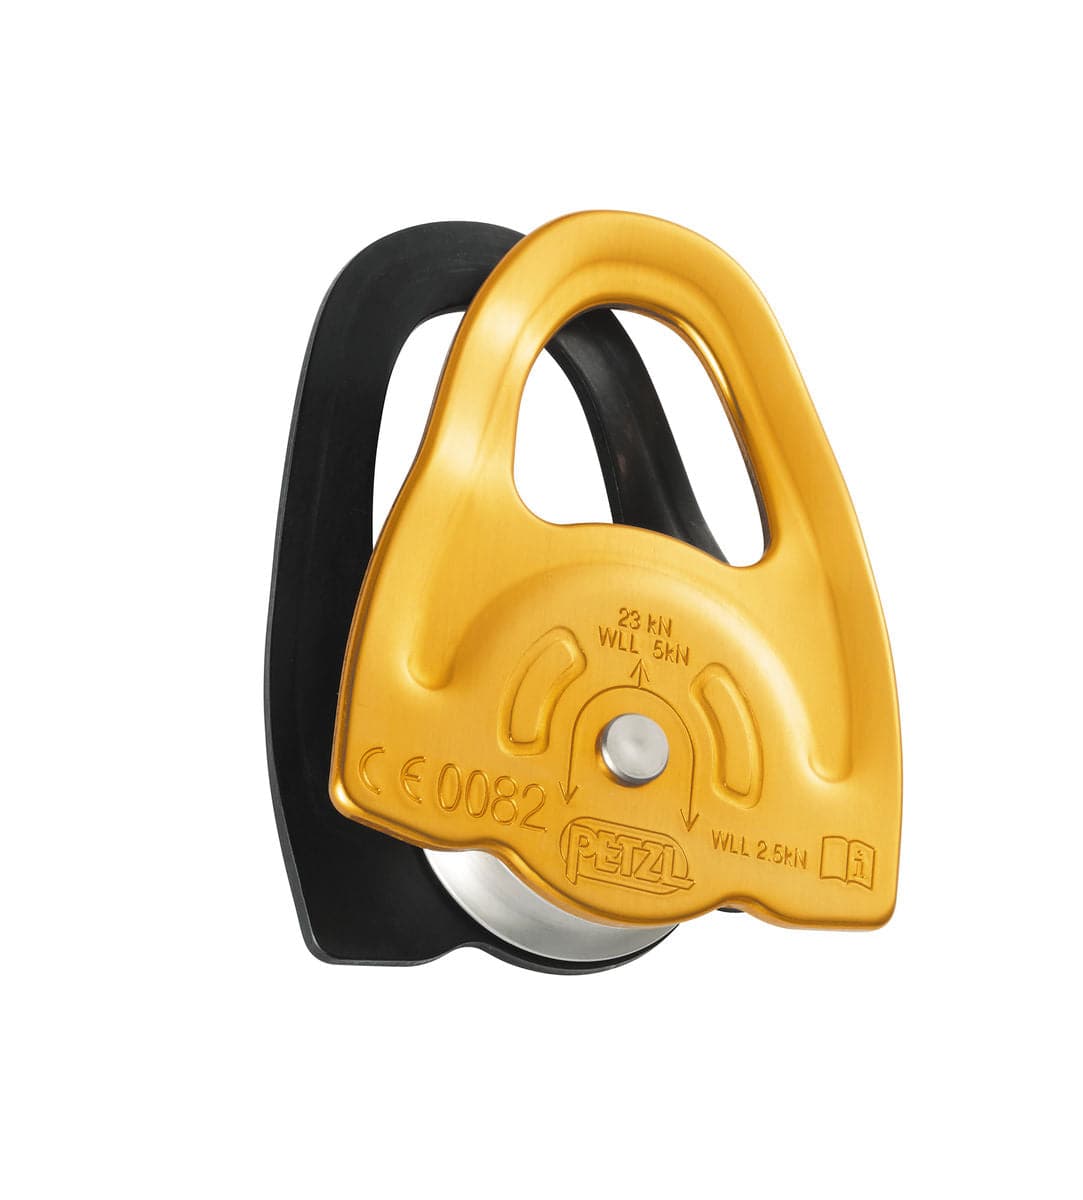 Petzl MINI Compact Lightweight Highly Efficient Prusik Pulley P59A - SecureHeights